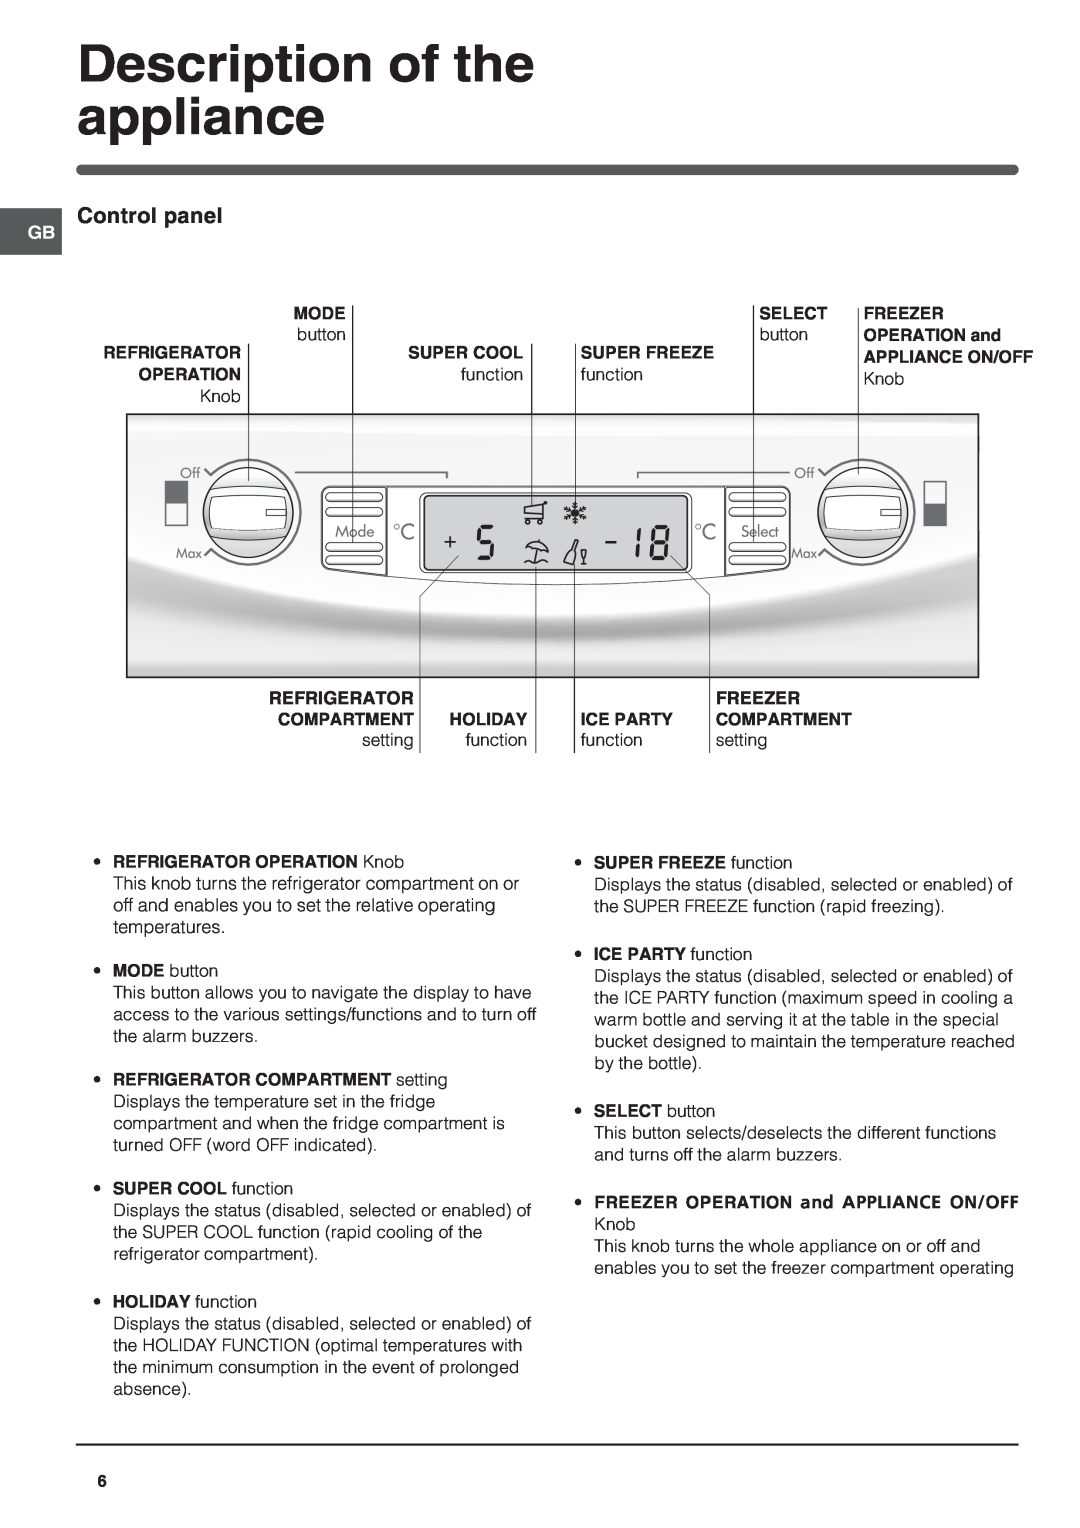 Hotpoint HME35 manual Description of the appliance, Control panel 